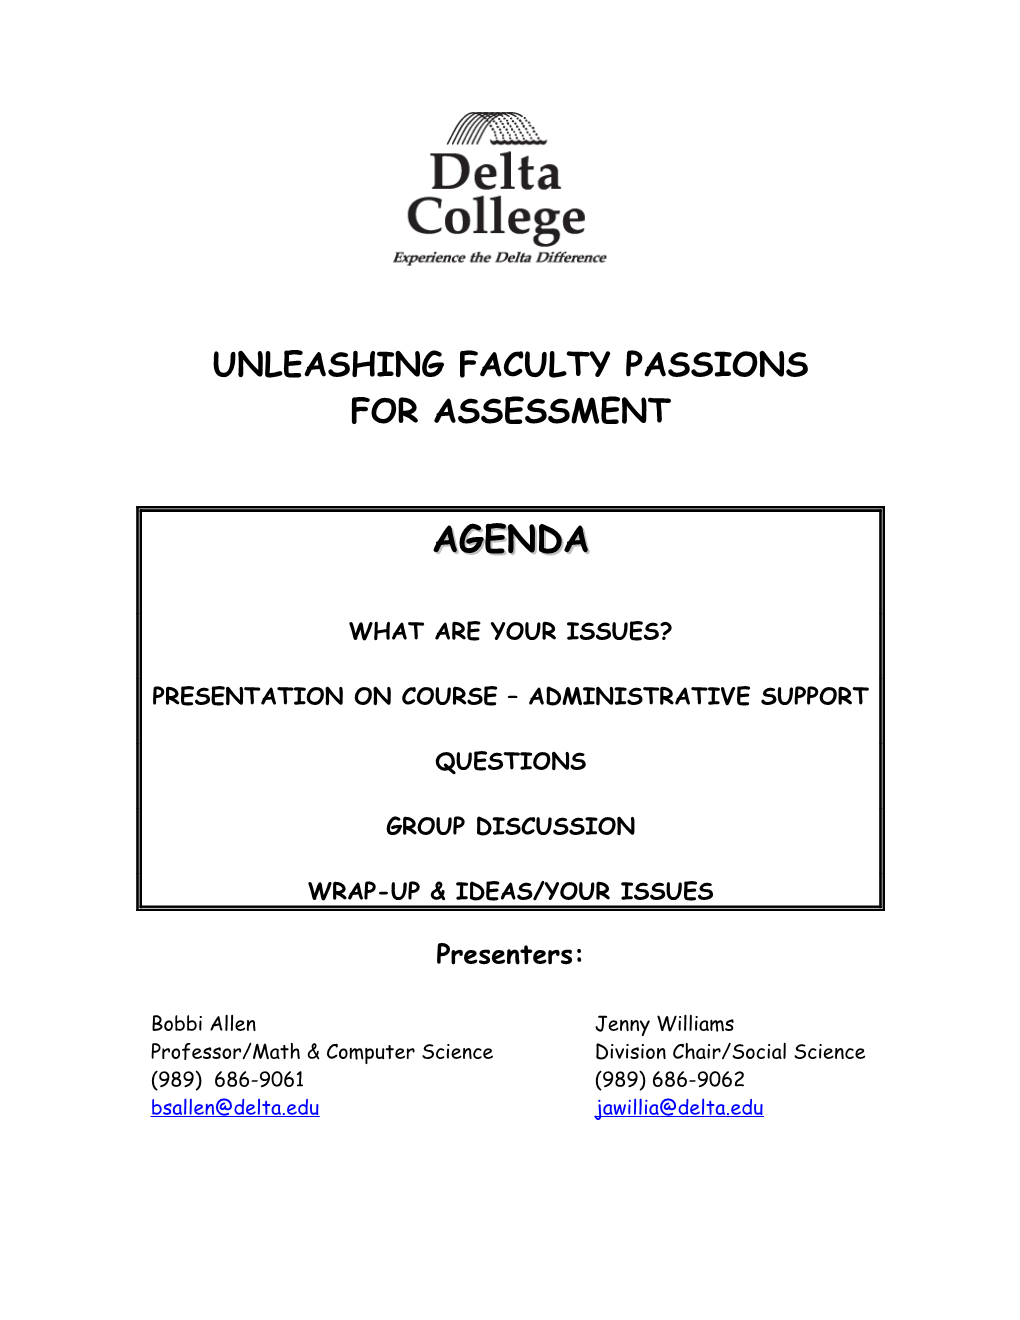 Unleashing Faculty Passions